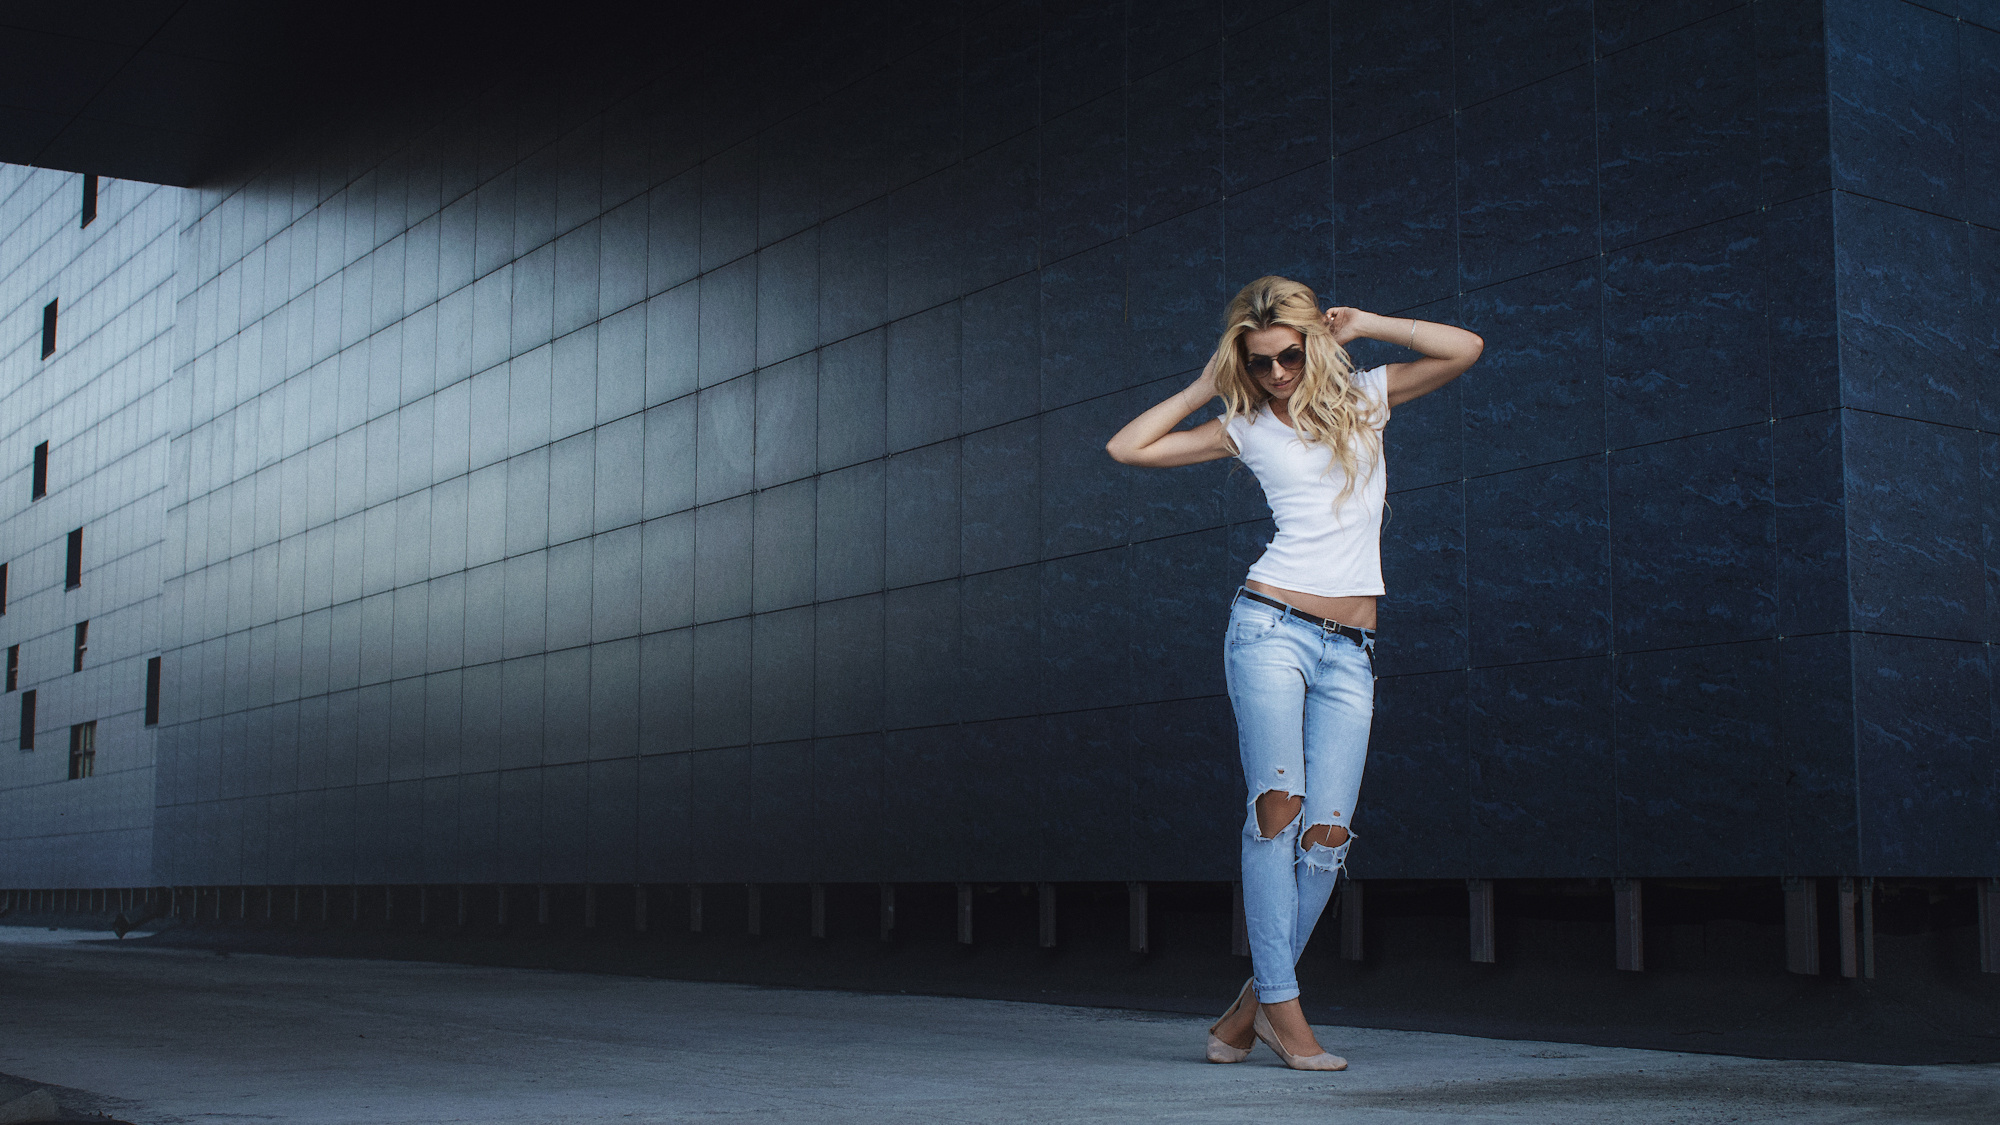 People 2000x1125 Ivan Kopchenov model women blonde sunglasses women with shades T-shirt jeans torn jeans hands in hair